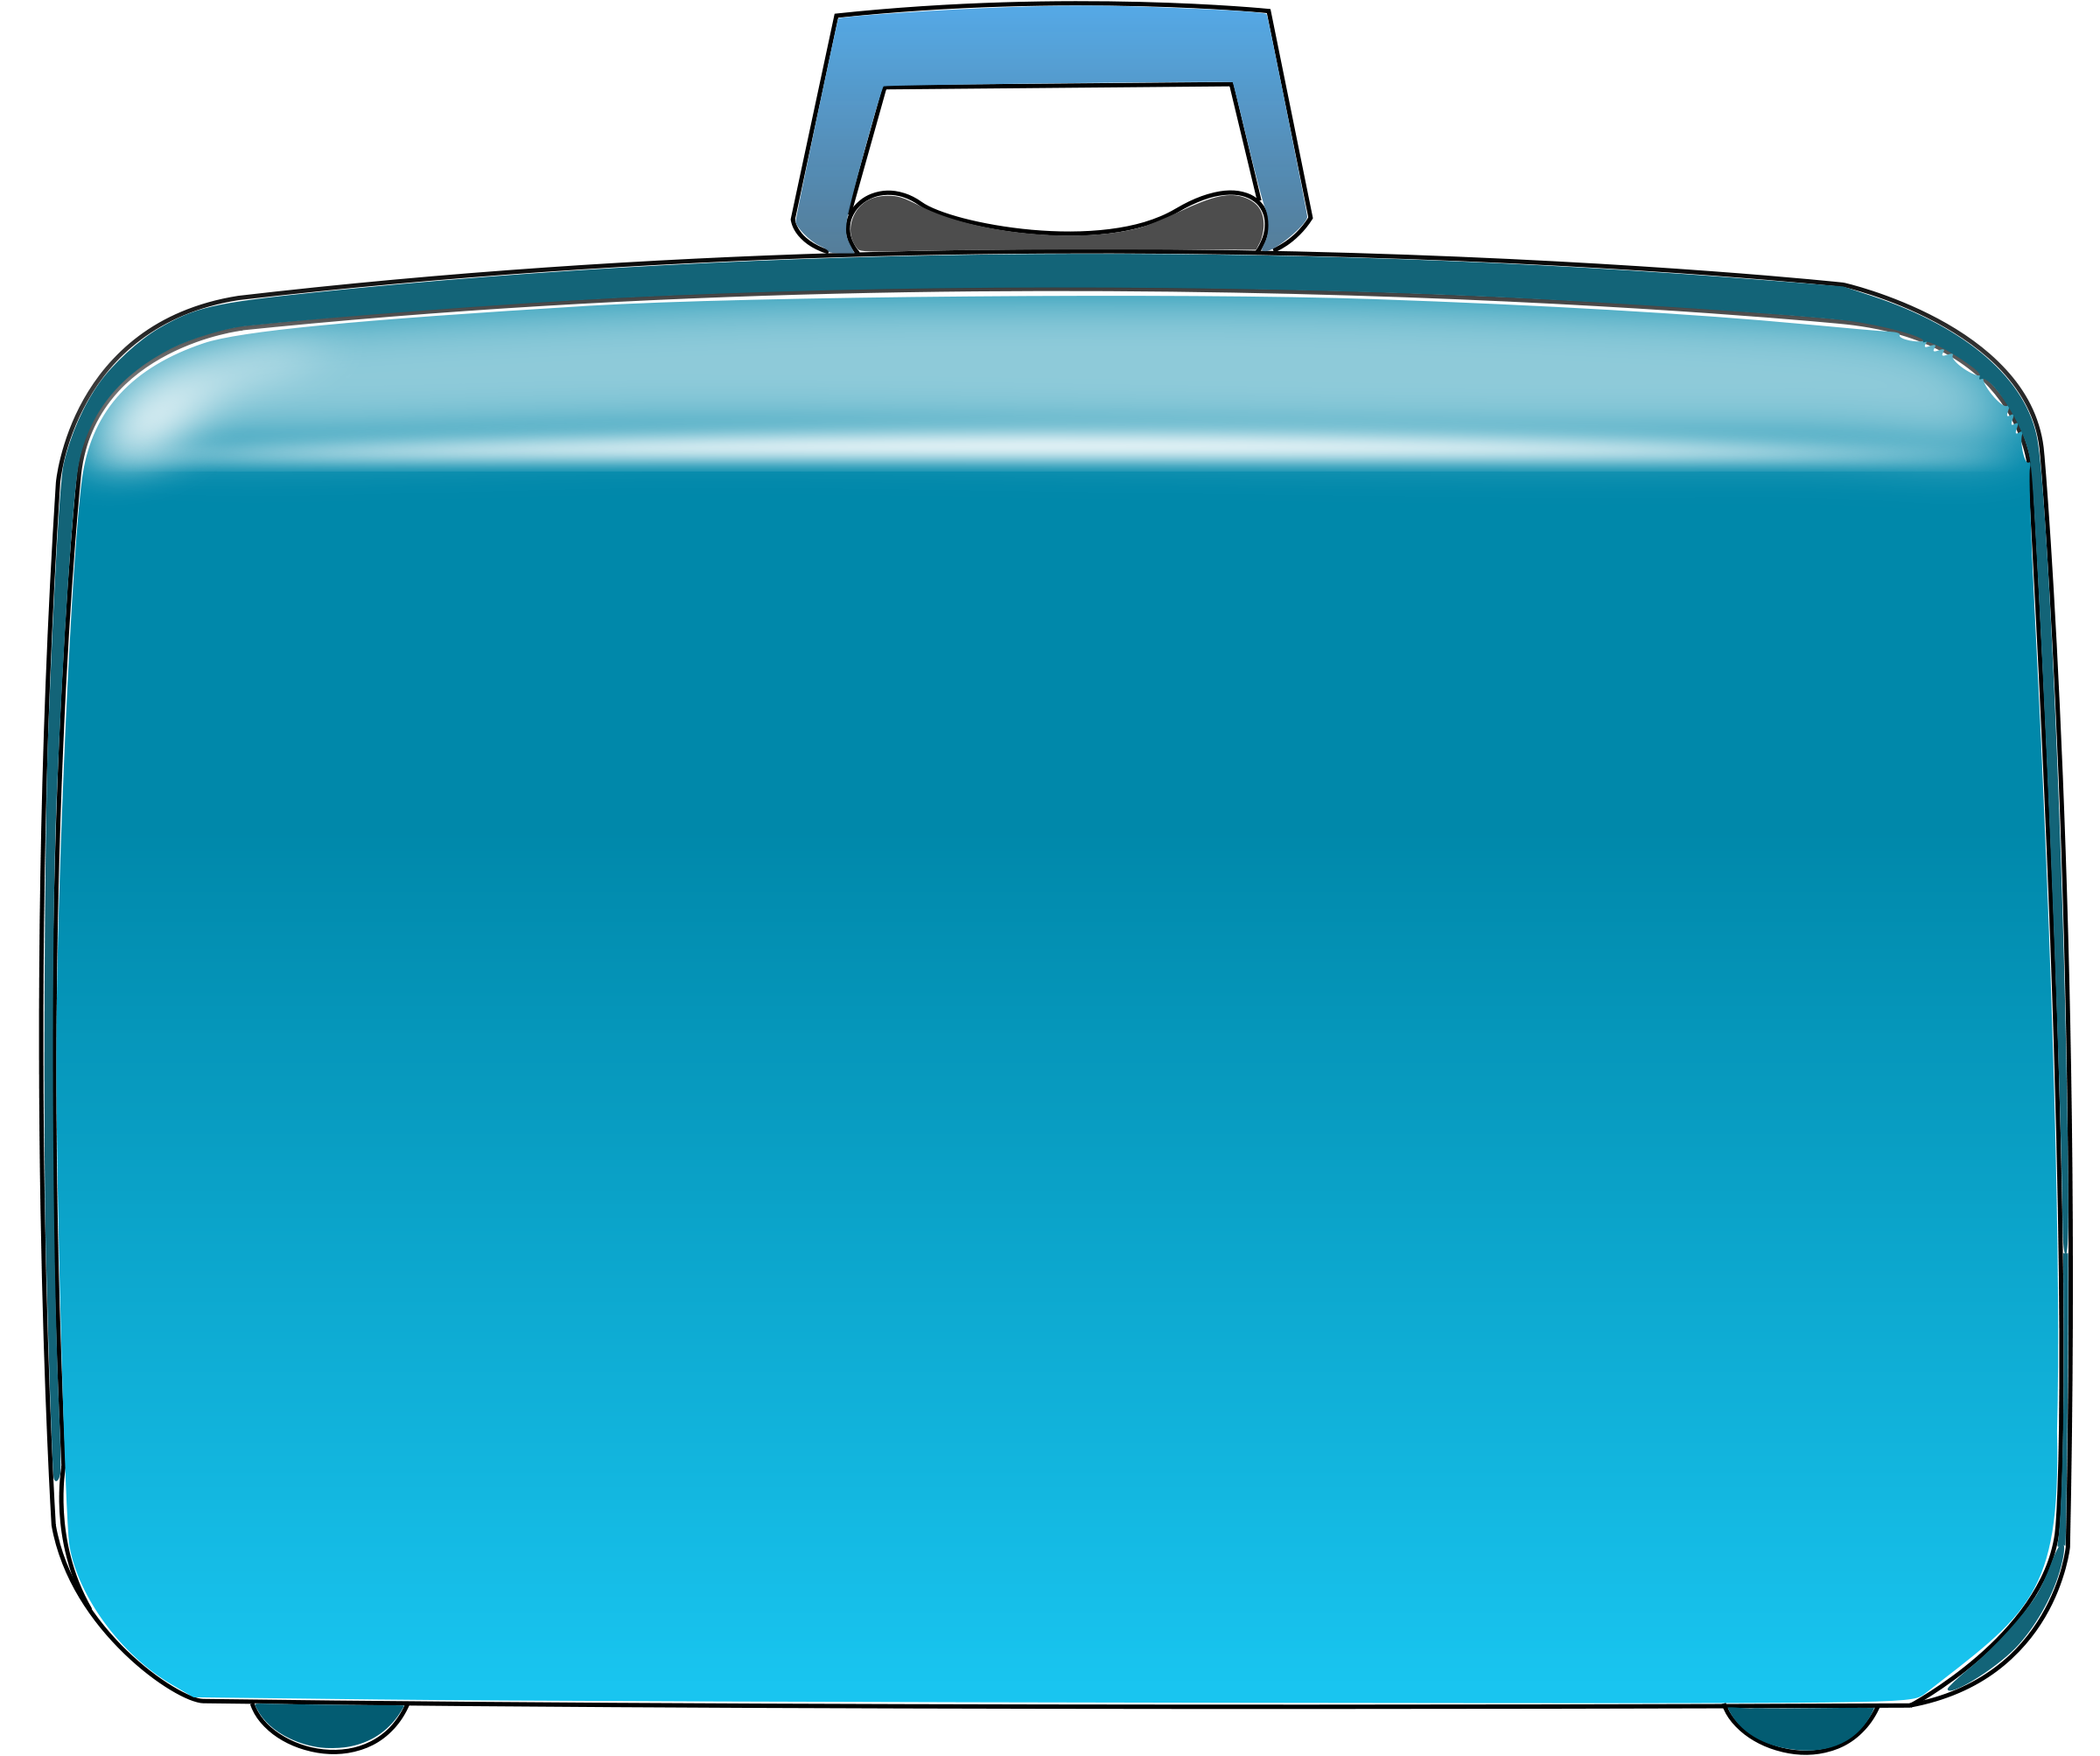 Luggage Clipart Free Travel Suitcase Clip Art